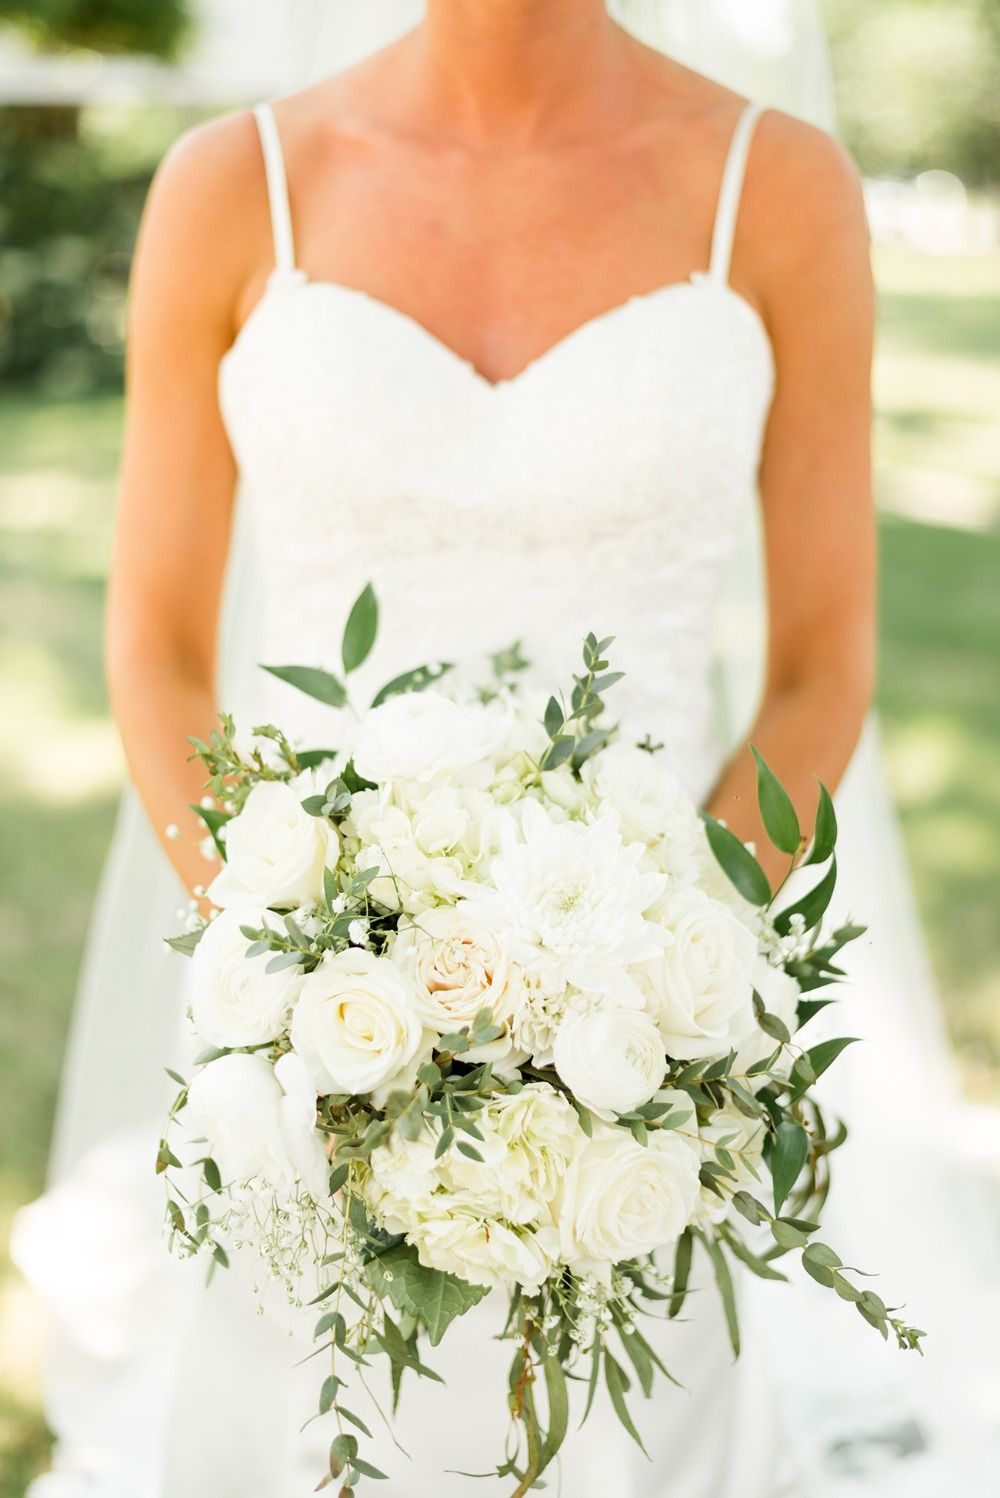 White Wedding Bouquets for Every Season